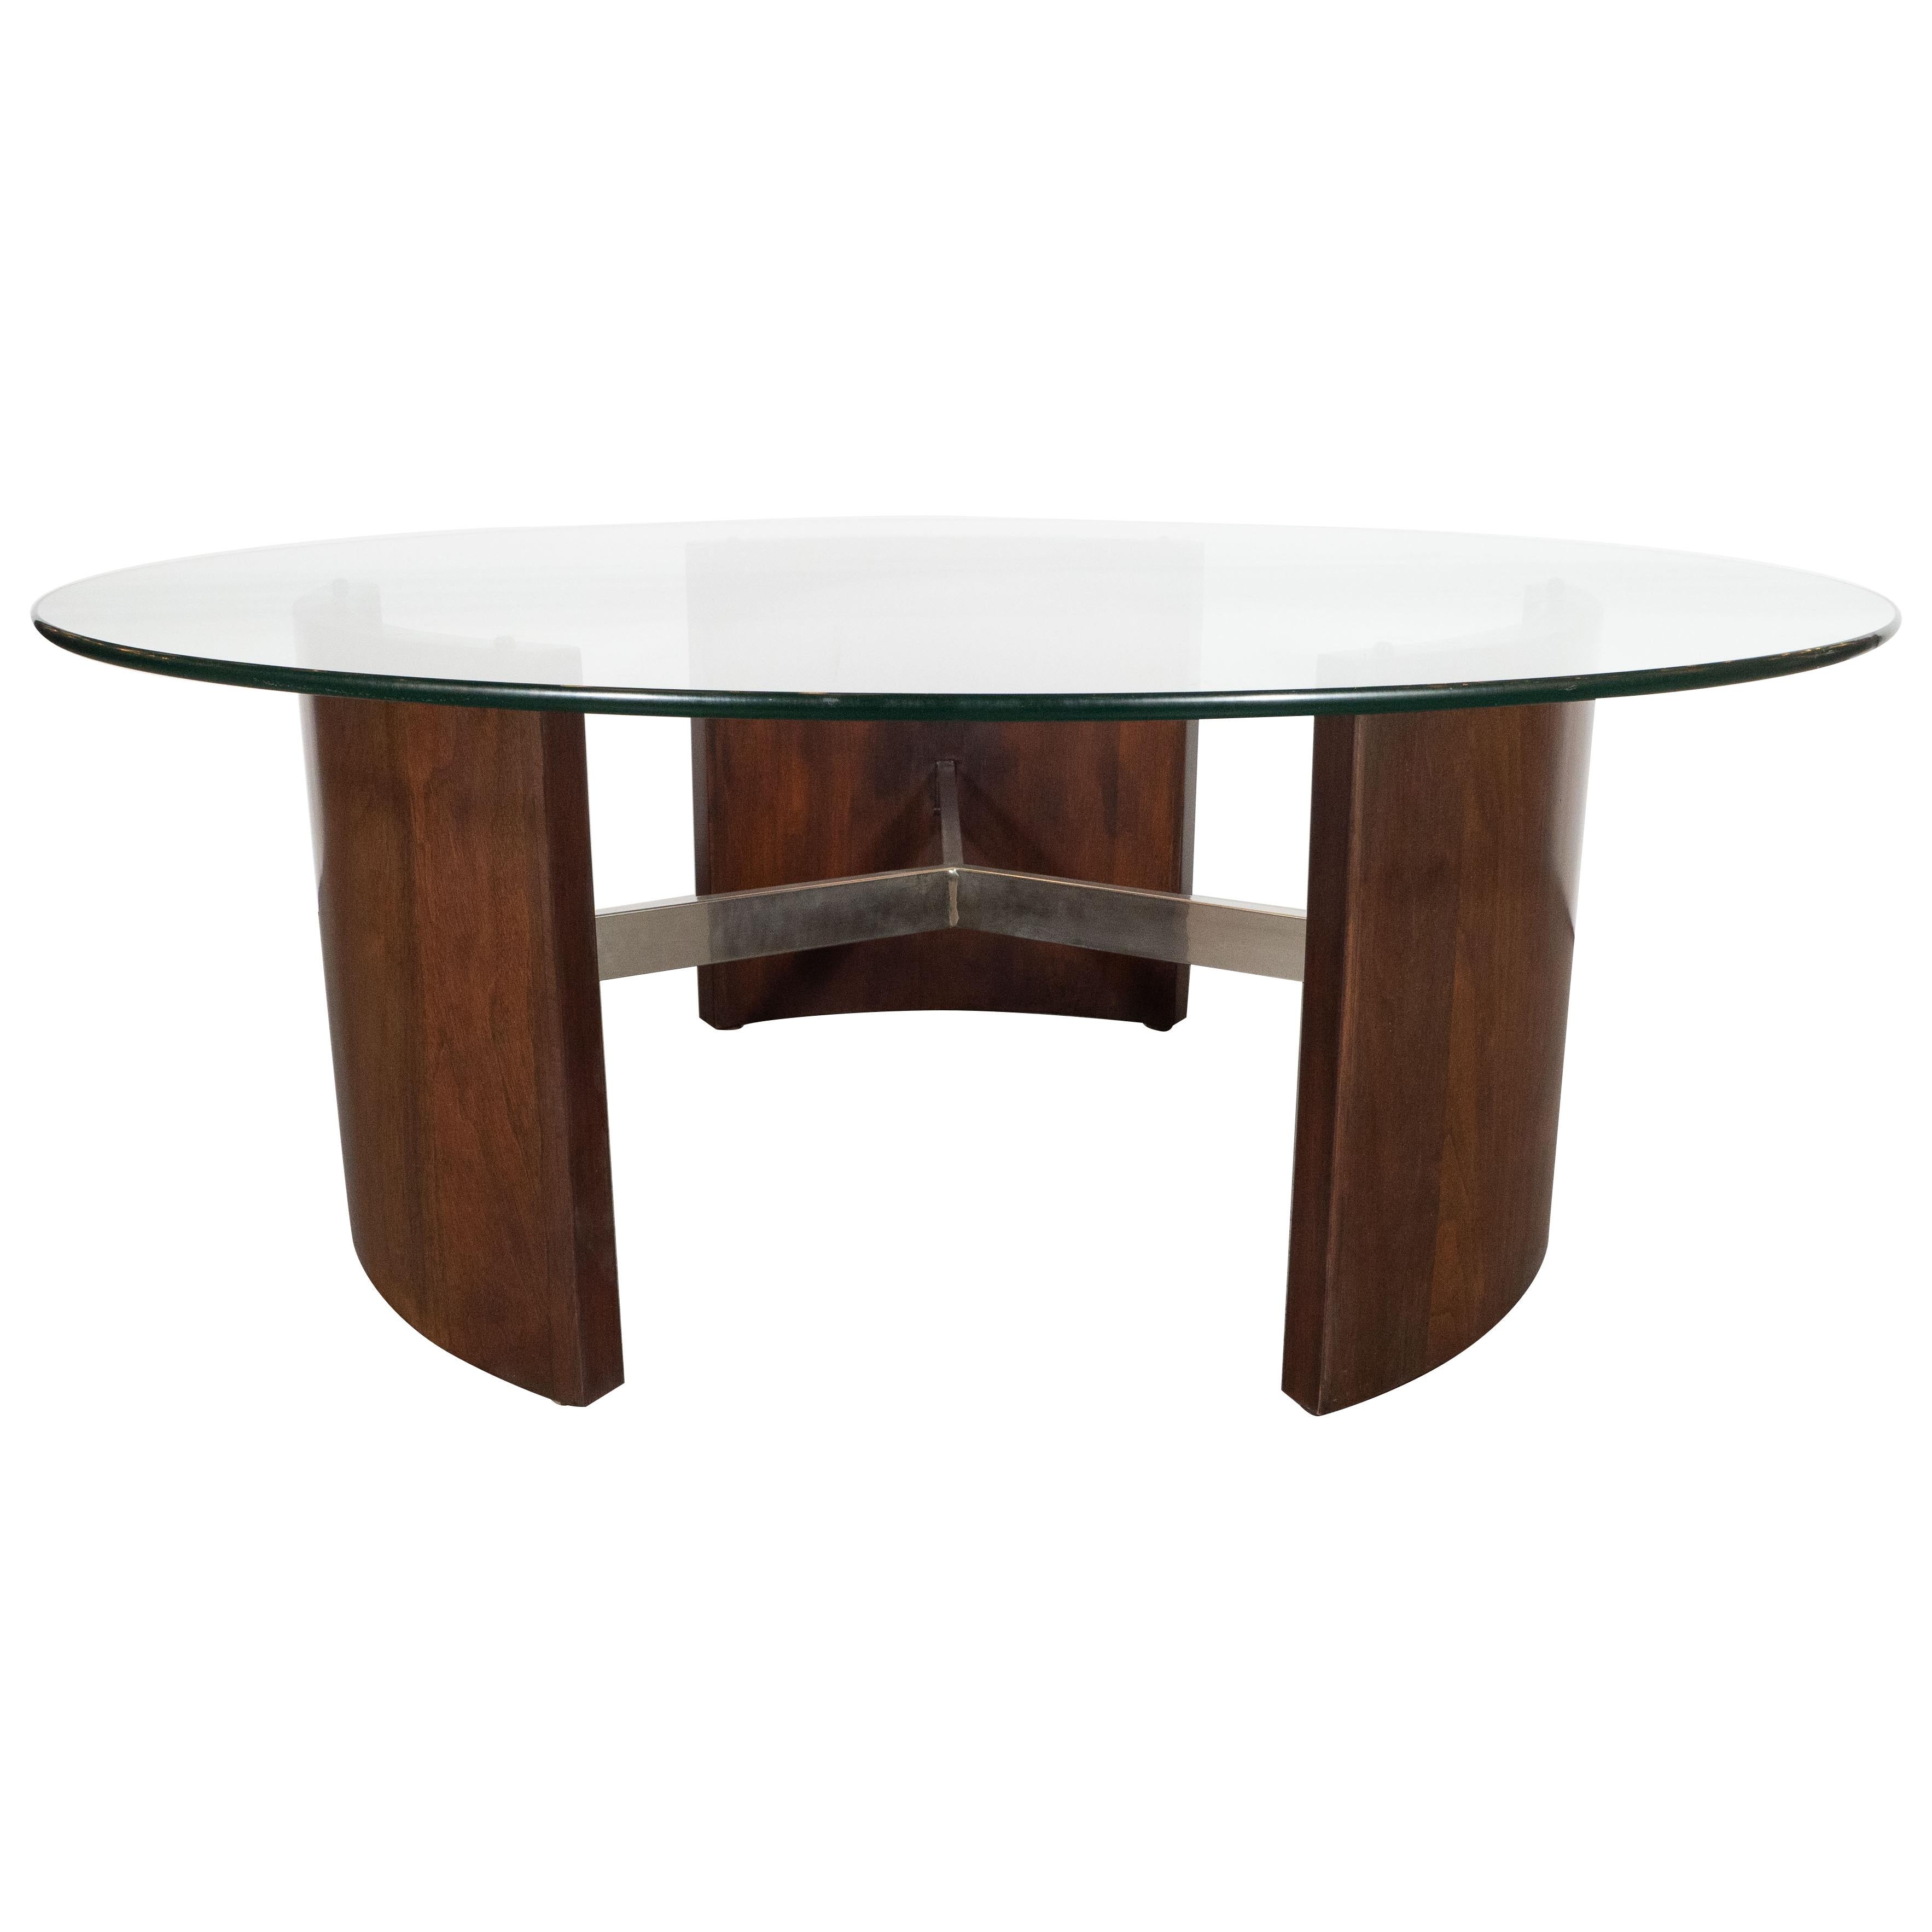 This refined Mid-Century Modern cocktail table was realized by Vladimir Kagan- one of the most celebrated designers of the 20th century- in the United States, circa 1970. It features three rectilinear bowed panels of bookmatched hand rubbed walnut